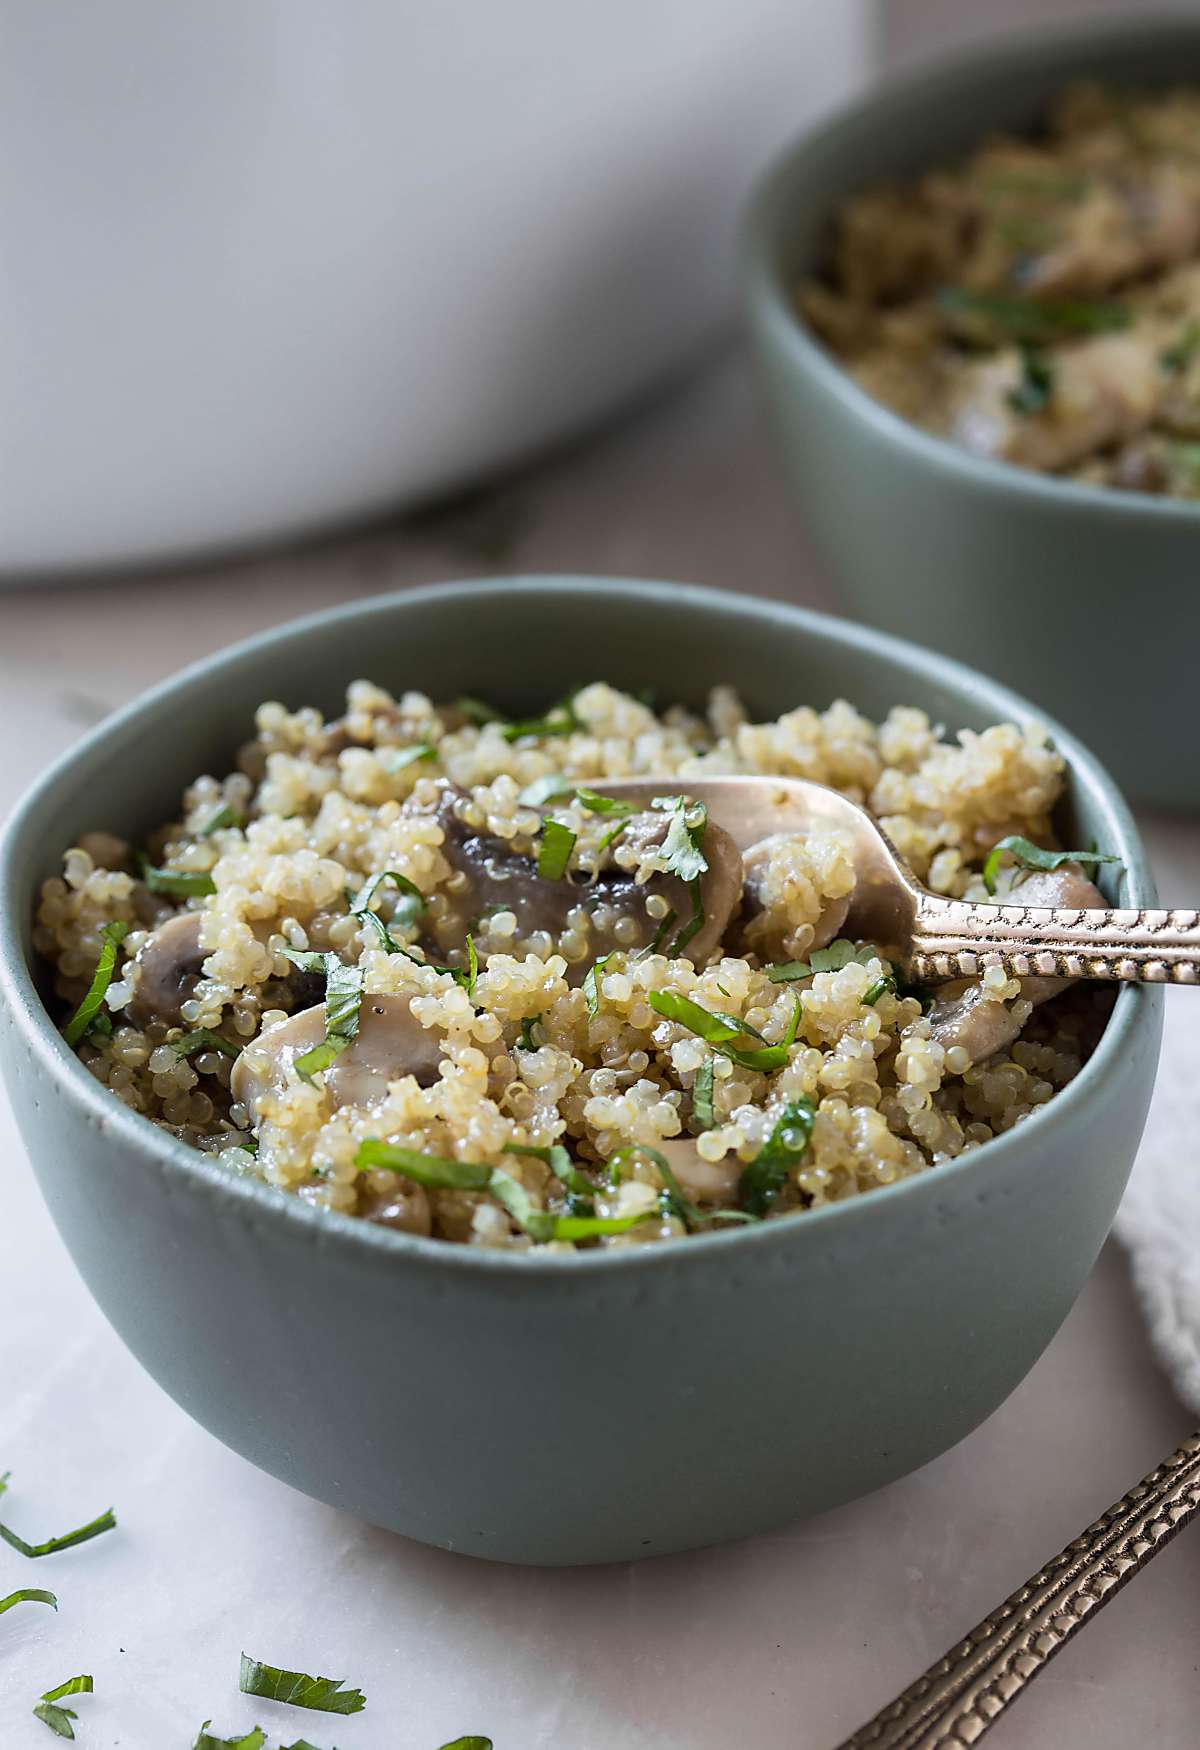 Healthy quinoa with mushroom and garlic served in a ceramic bowl with metal fork.